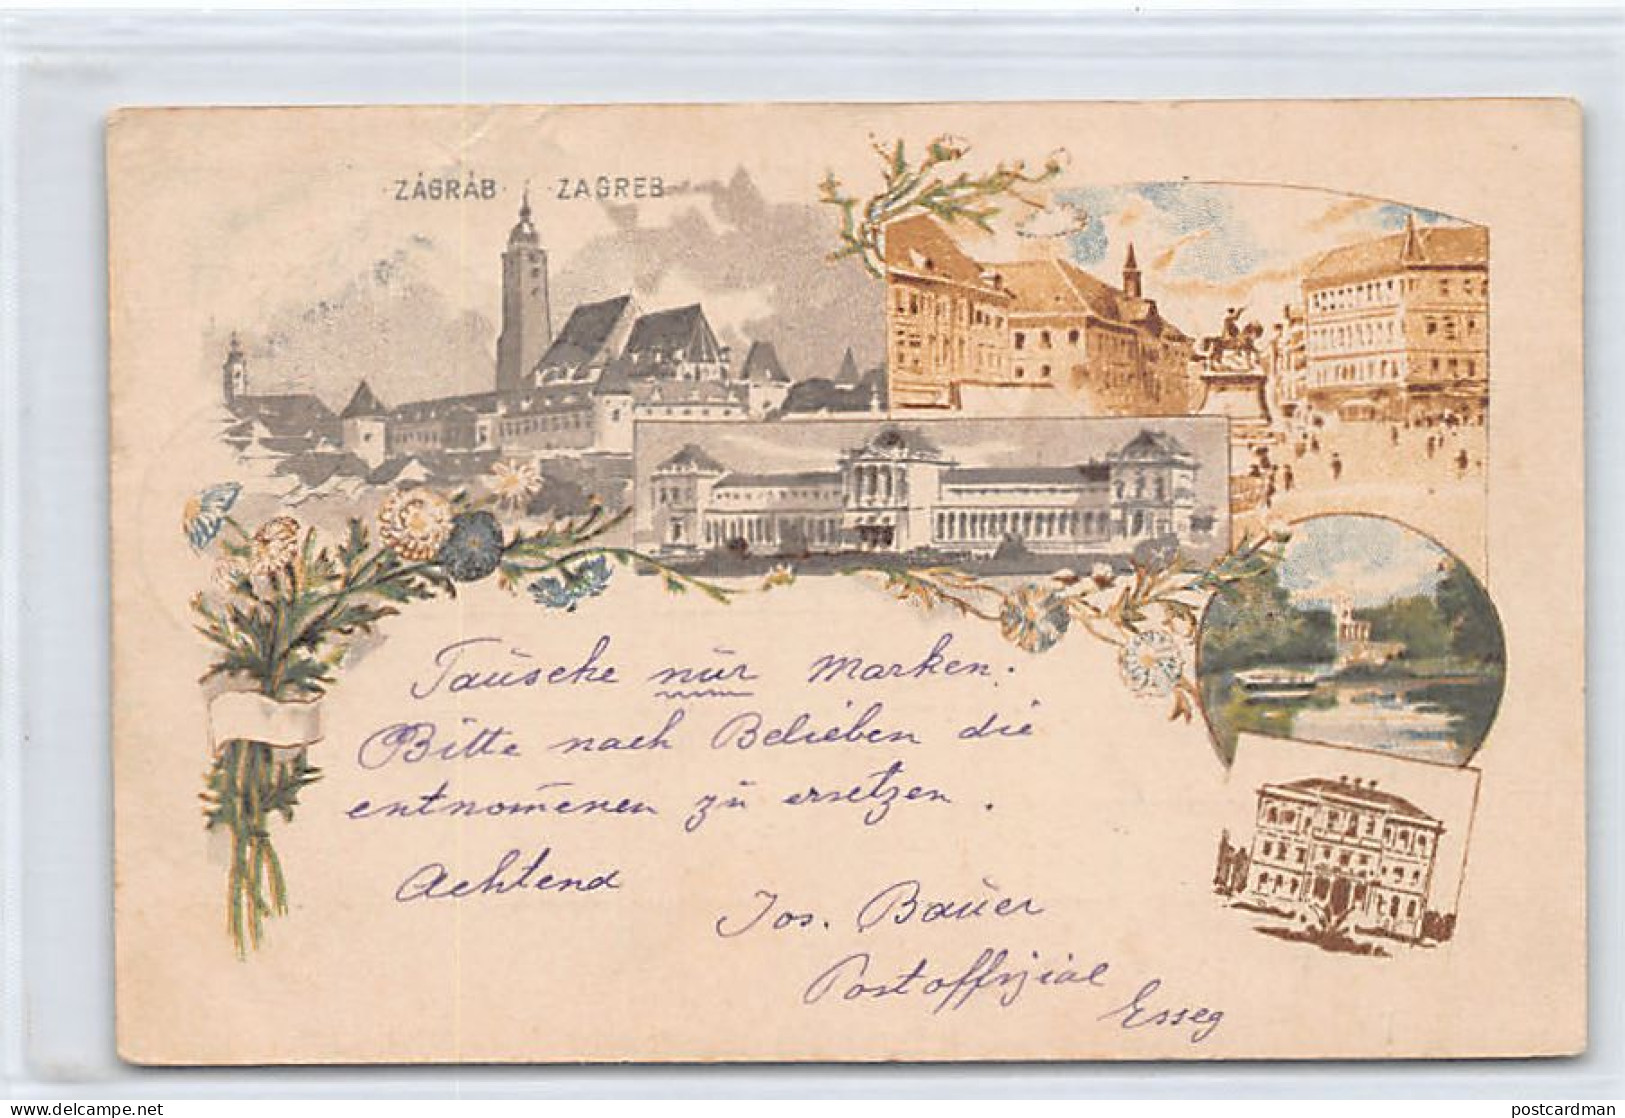 Croatia - ZAGREB - Litho - Year 1900 - Publ. Stamped Postcard (Austro-Hungarian Post)  - Croatie